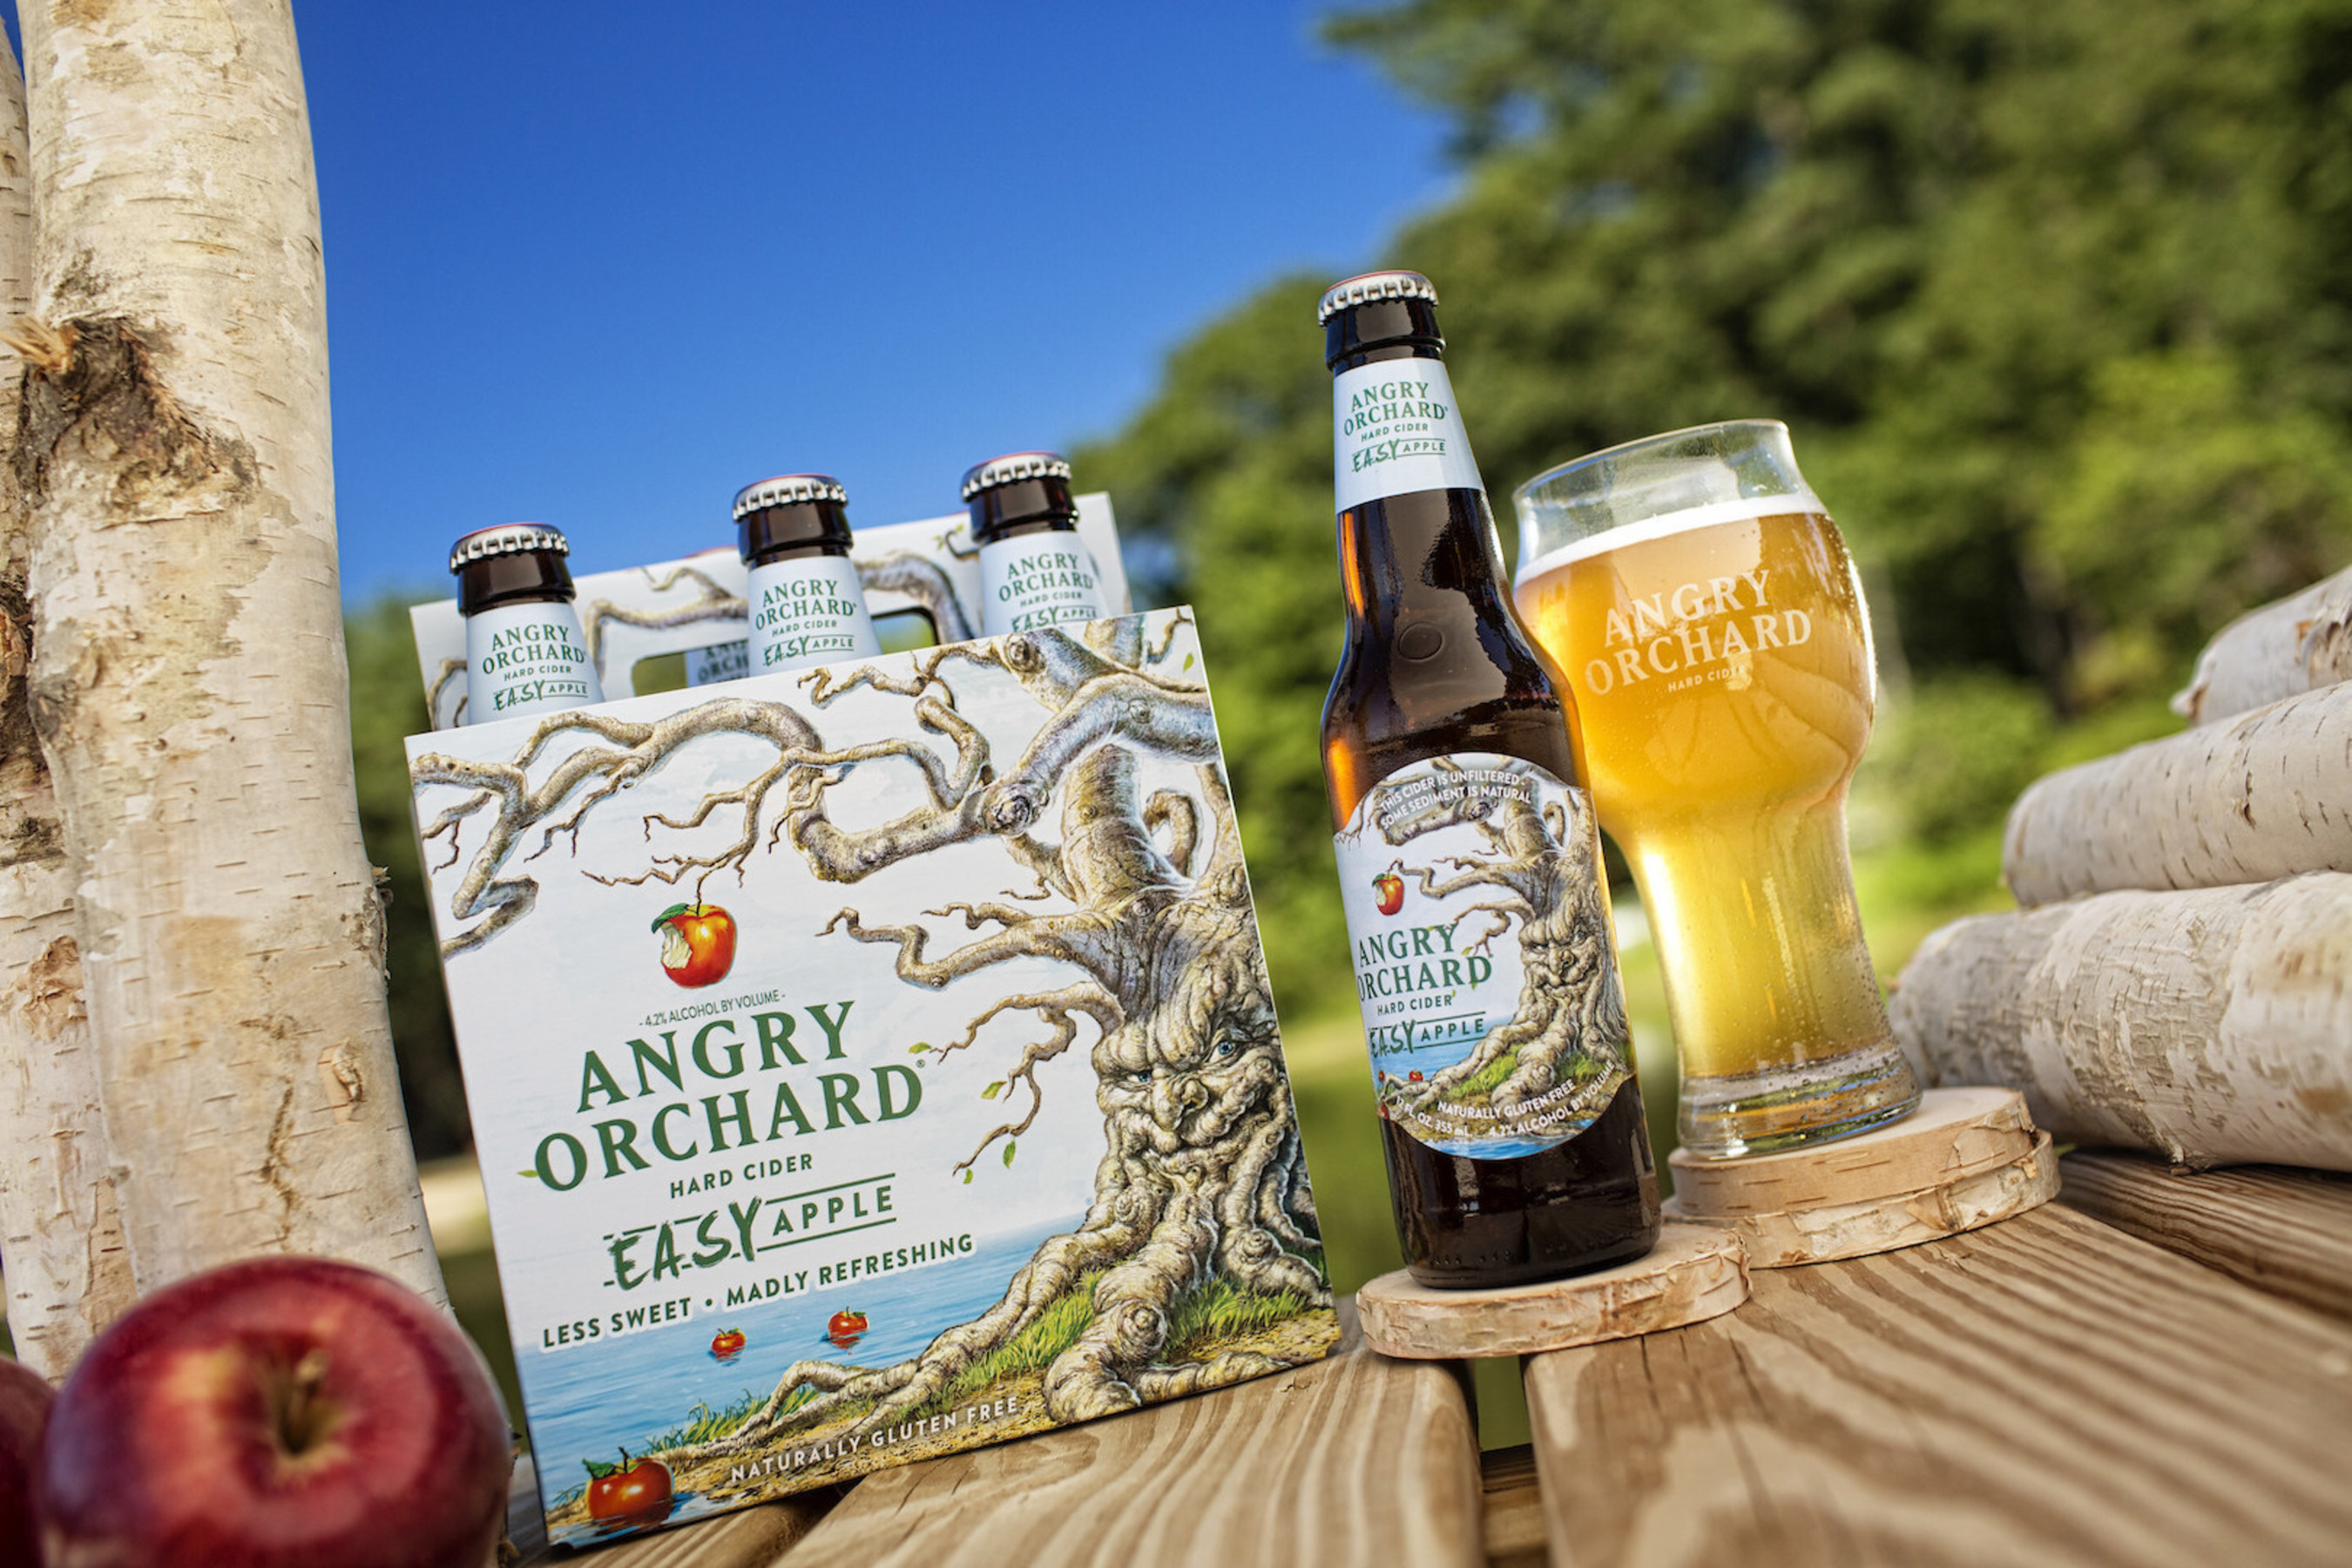 Angry Orchard introduces Easy Apple hard cider: less sweet, madly refreshing.